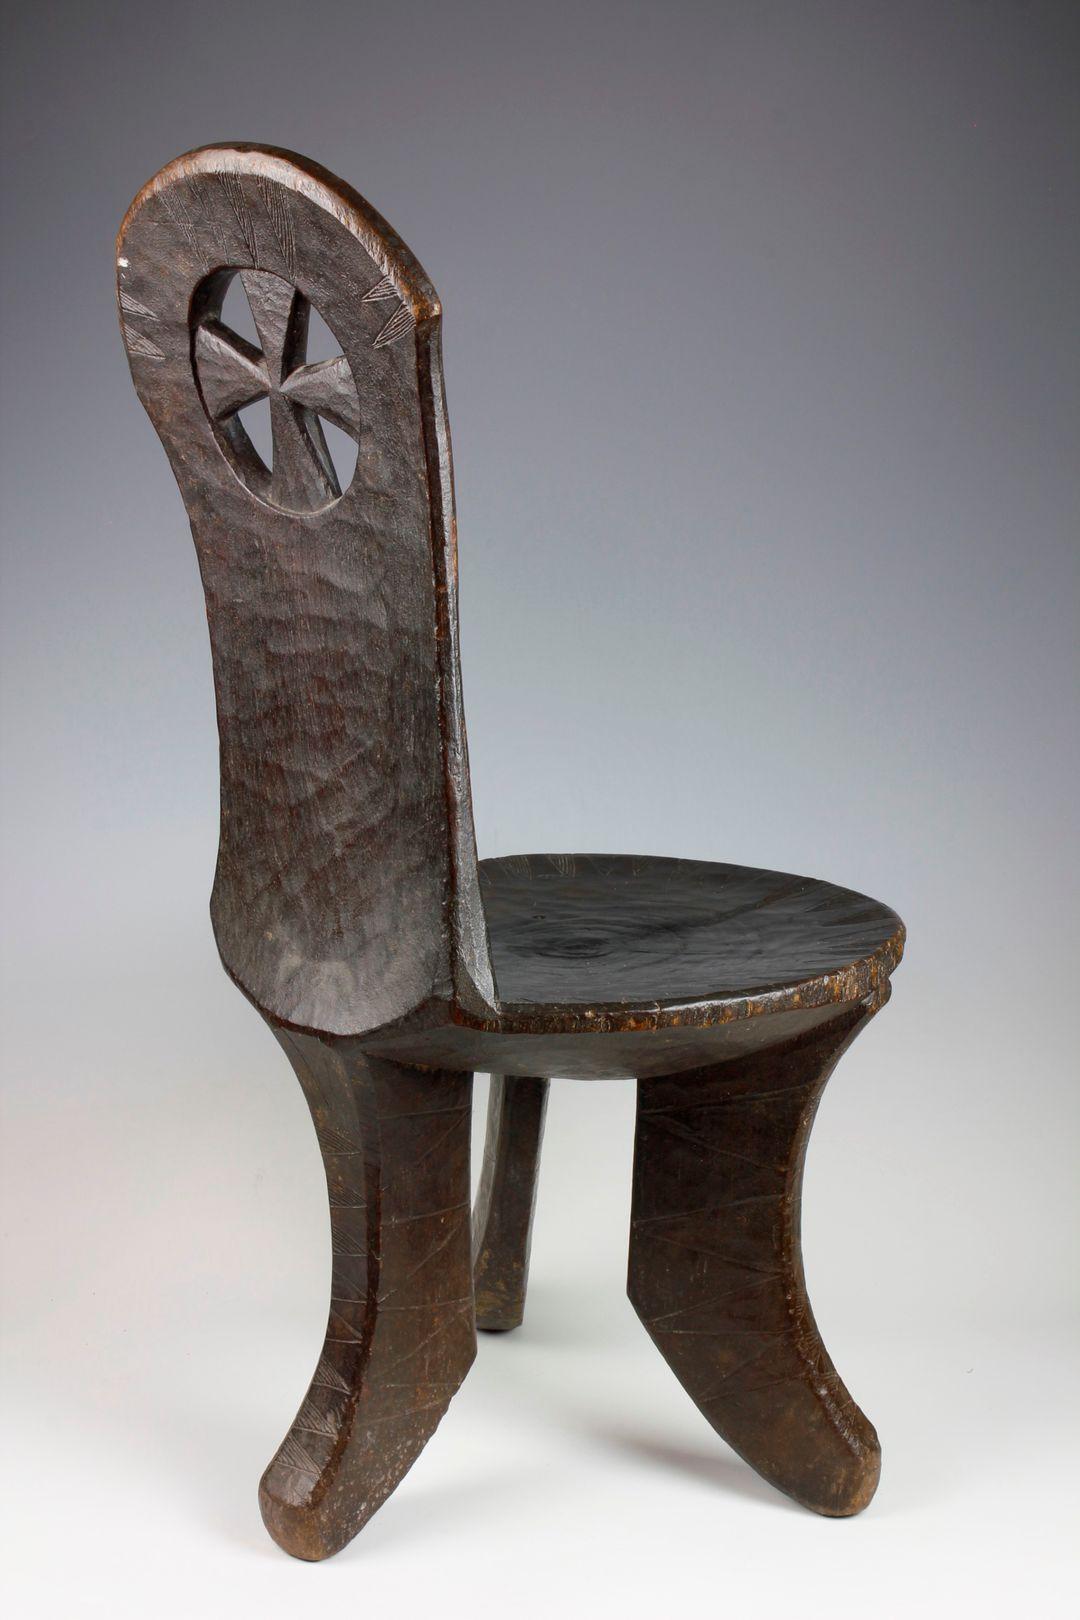 Carved Late 19th Century/Early 20th Century High-Backed Ethiopian Chair For Sale